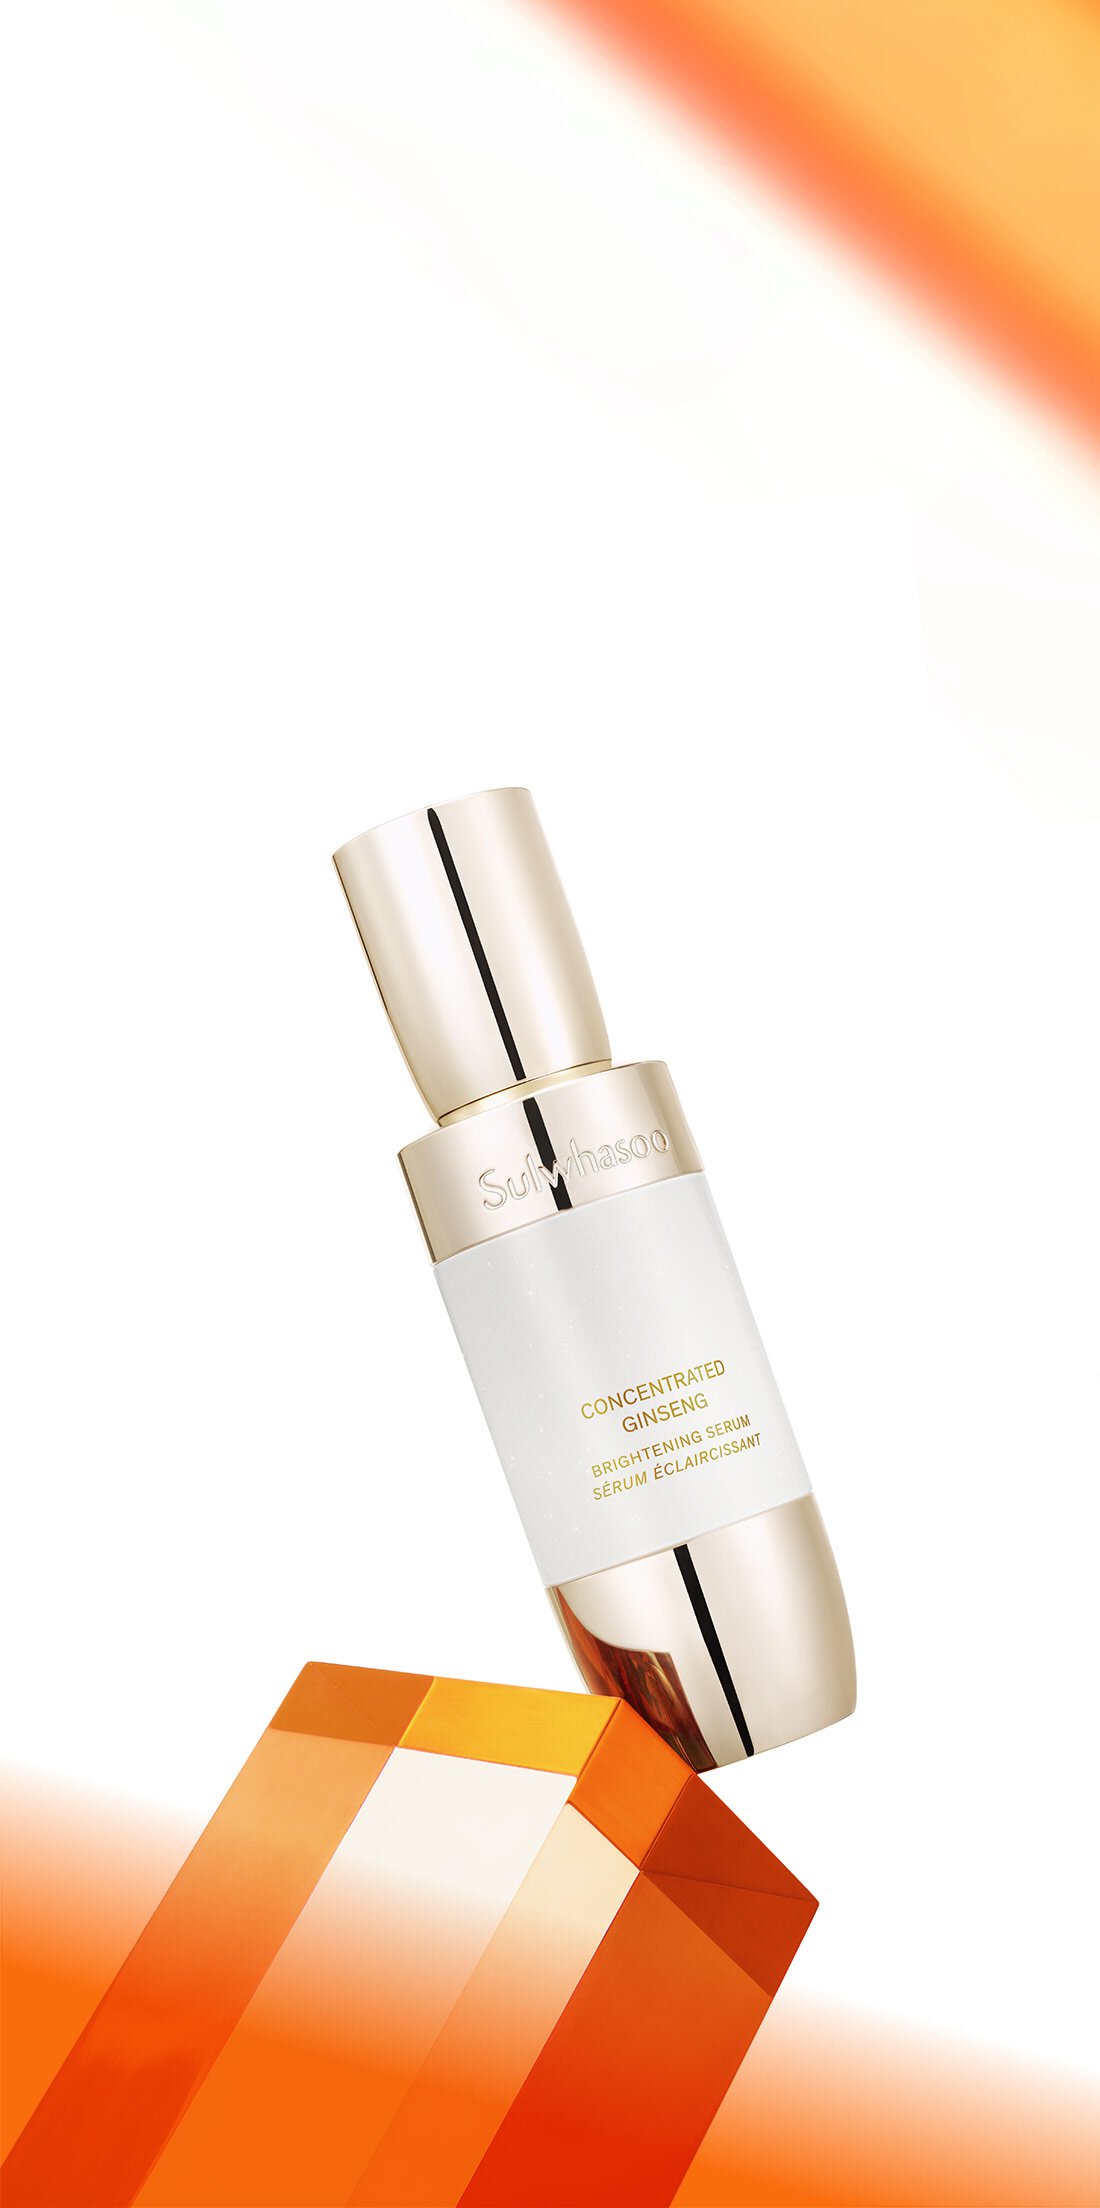 Sulwhasoo CONCENTRATED GINSENG BRIGHTENING SERUM - achieve clearer and radiant skin with the total skin brightening solution.